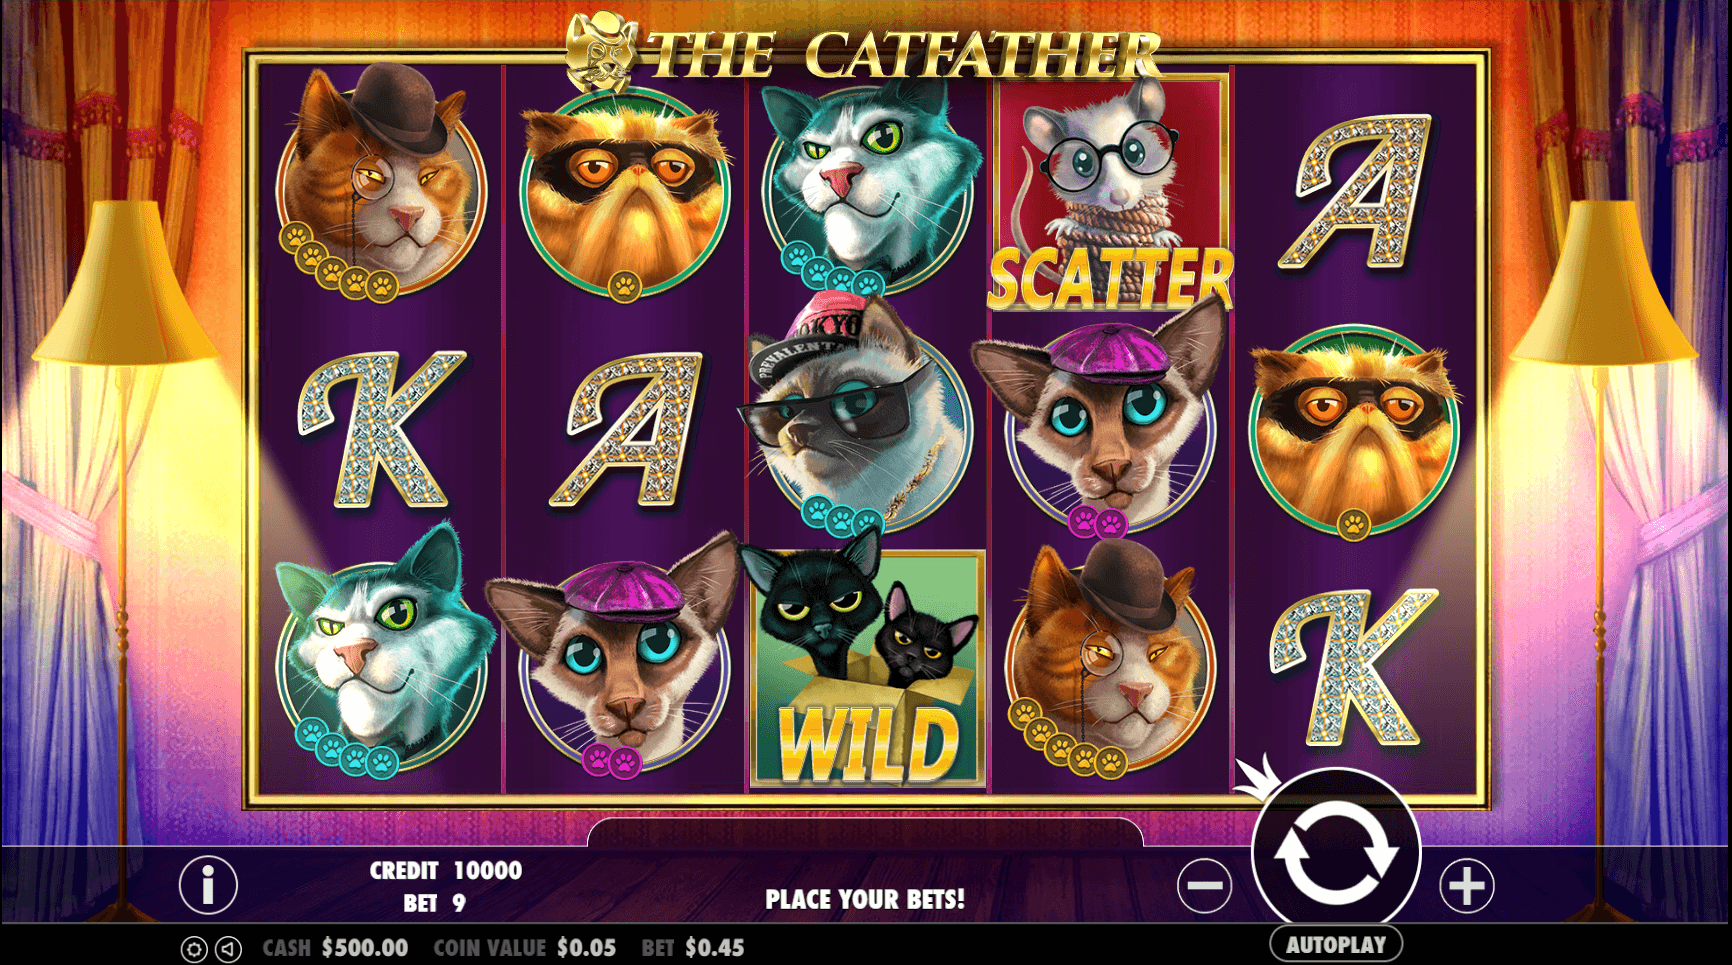 The Catfather slot